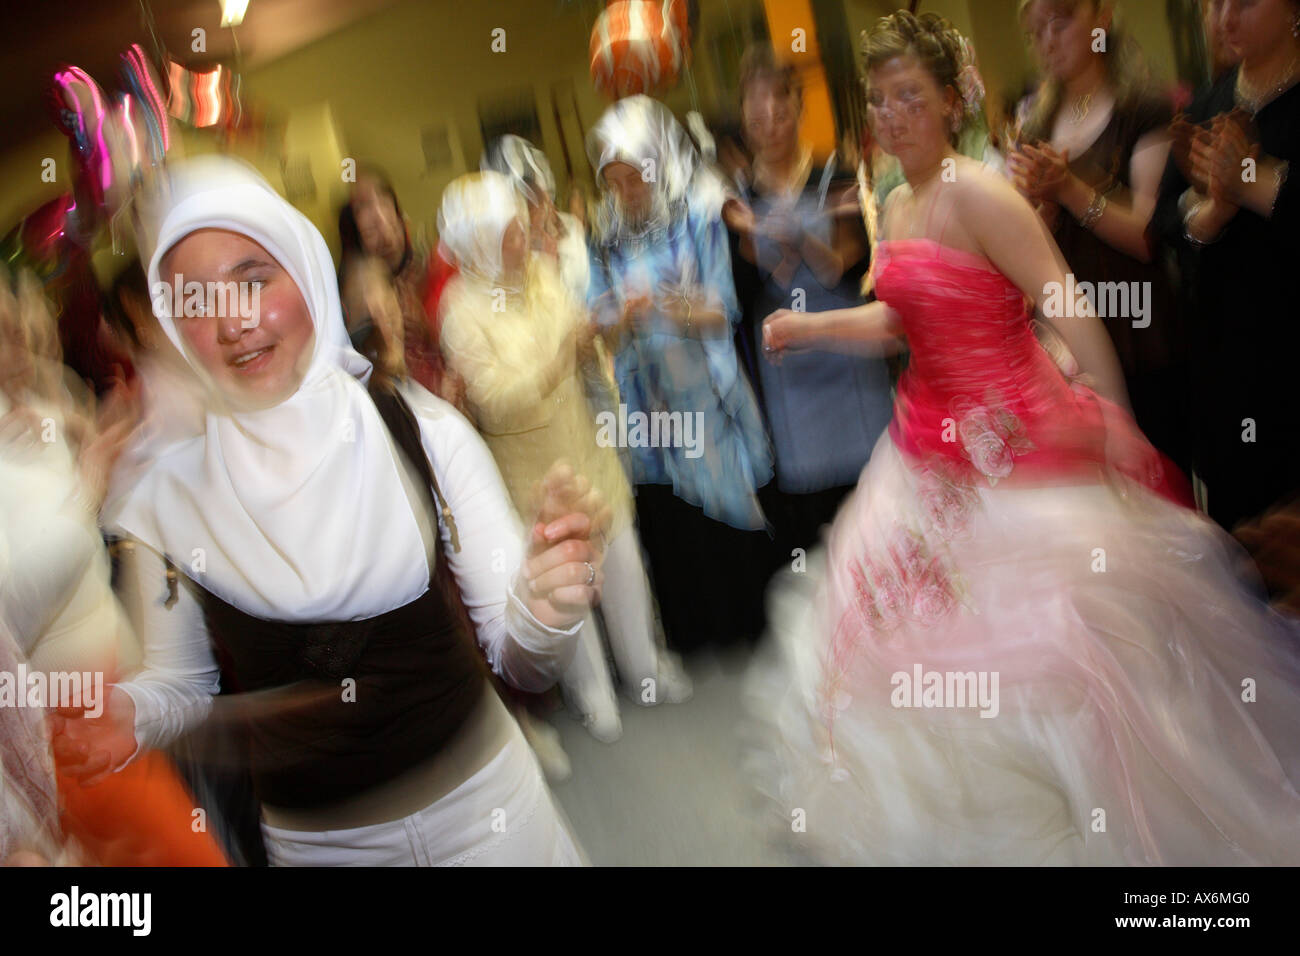 dancing bride and friends at turkish eve-of-the-wedding party. hamm, northrhine westphalia, germany, europe Stock Photo